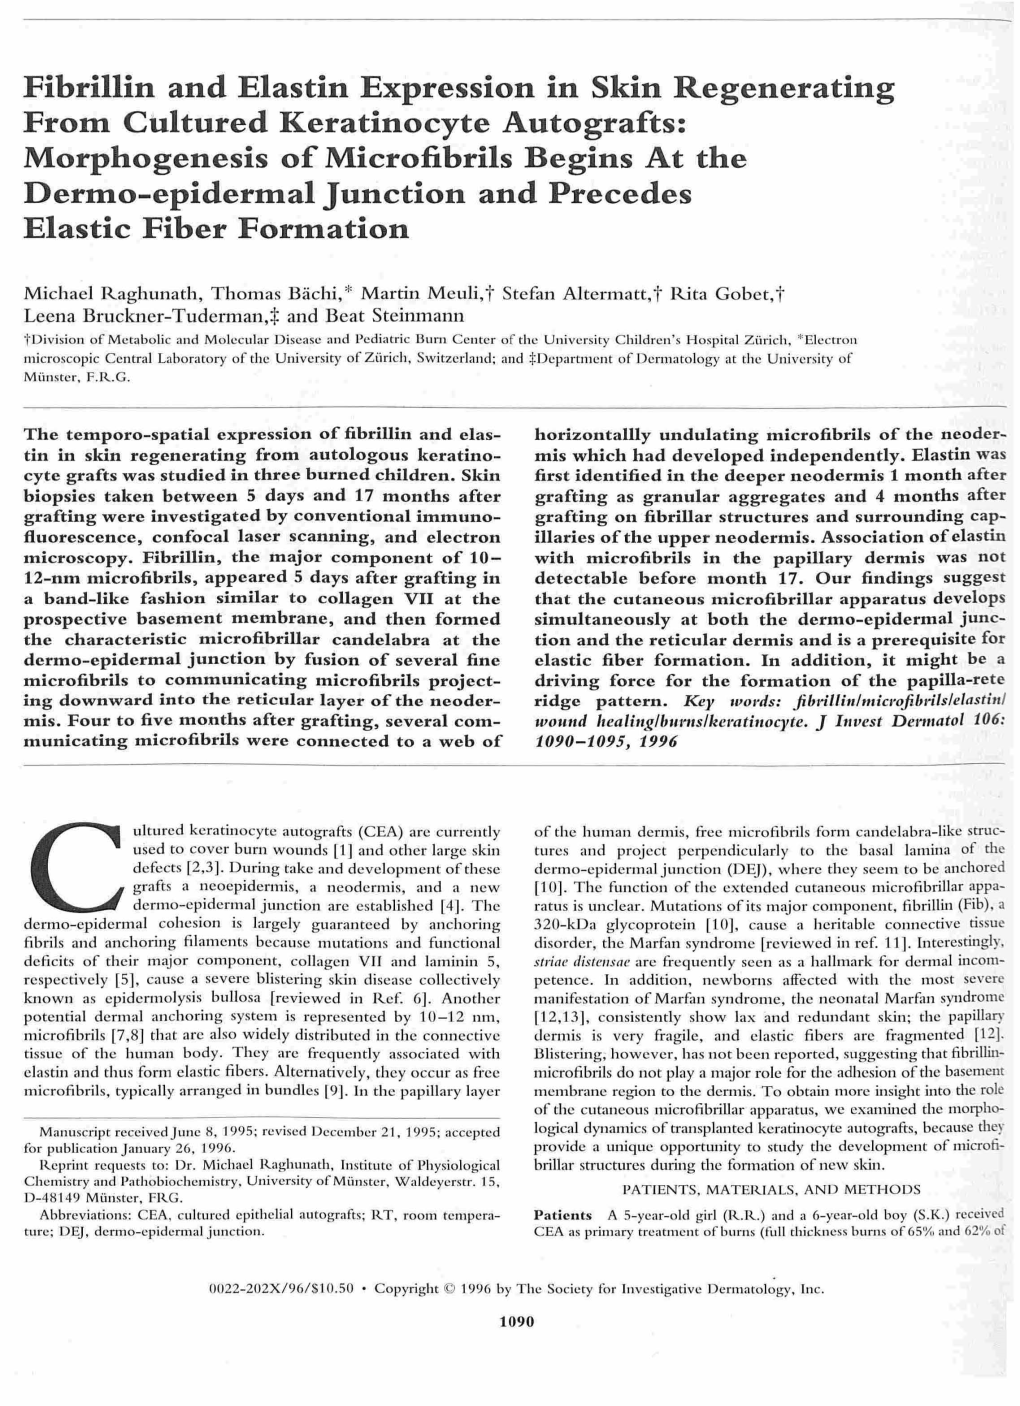 Fibrillin and Elastin Expression in Skin Regenerating from Cultured